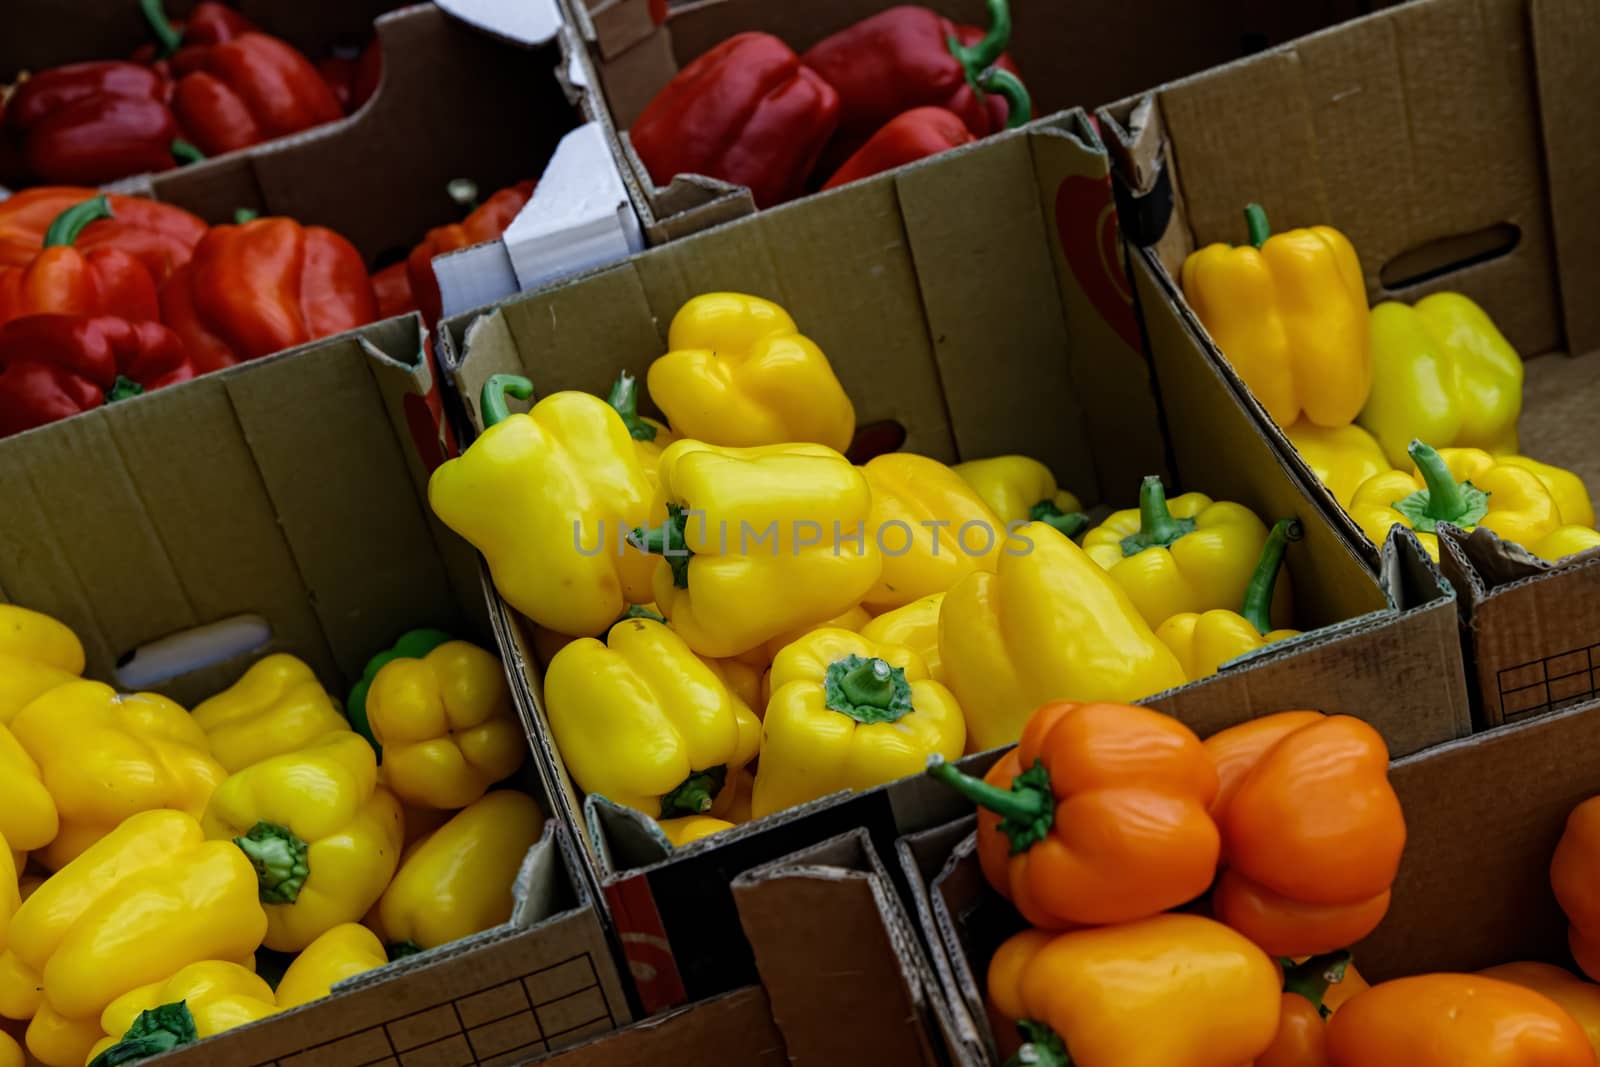 Lot of peppers at market place by bonilook